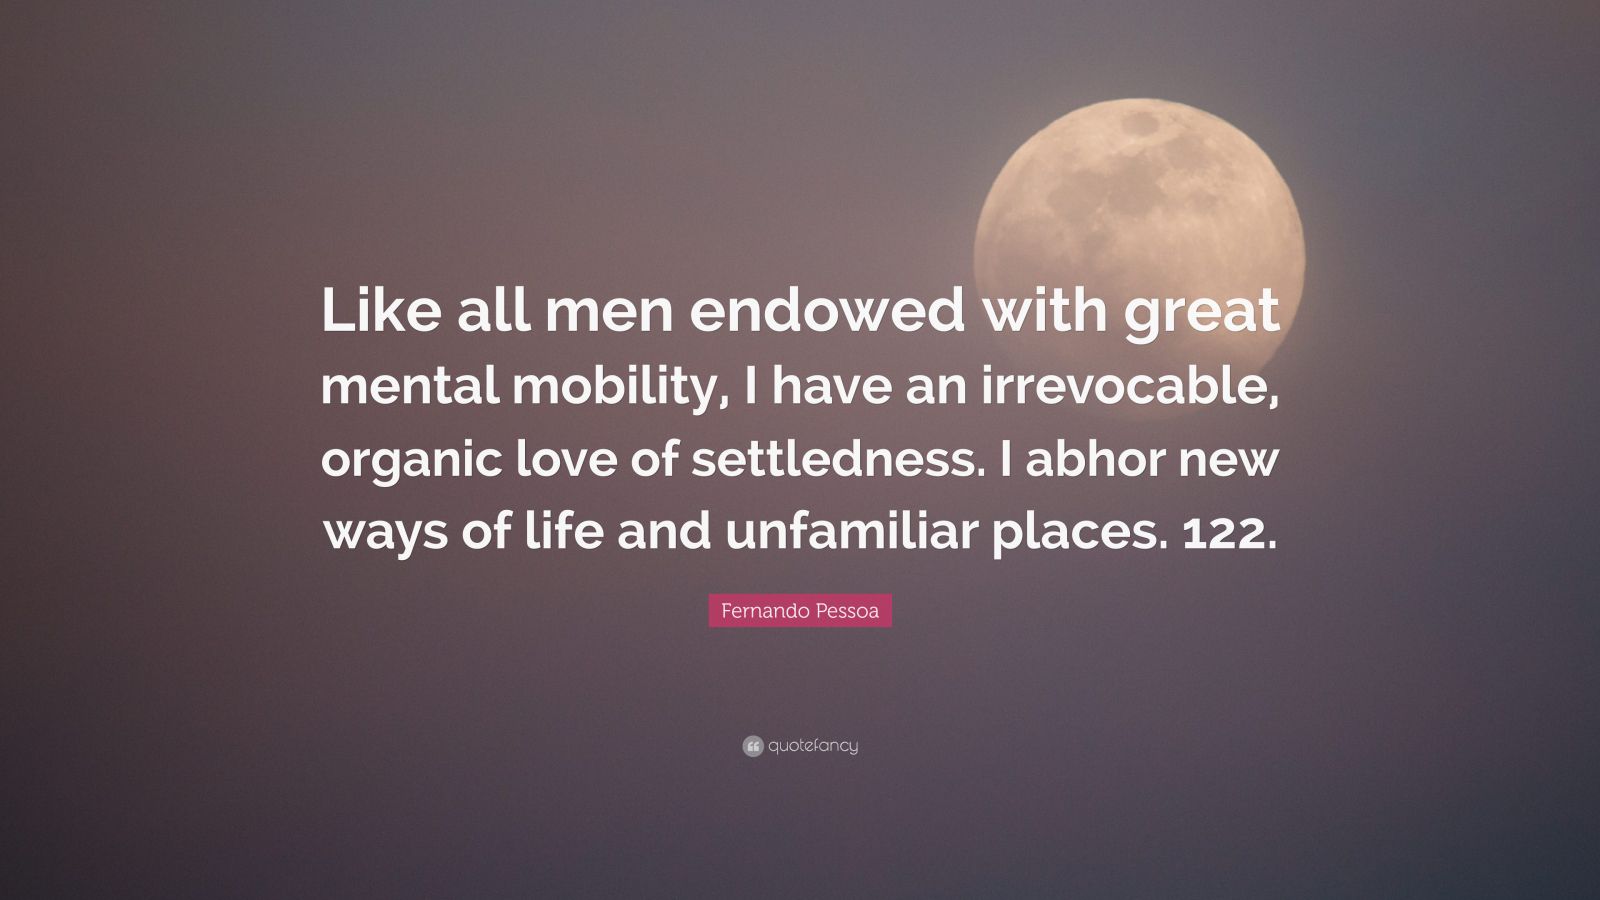 Fernando Pessoa Quote: “Like all men endowed with great mental mobility ...